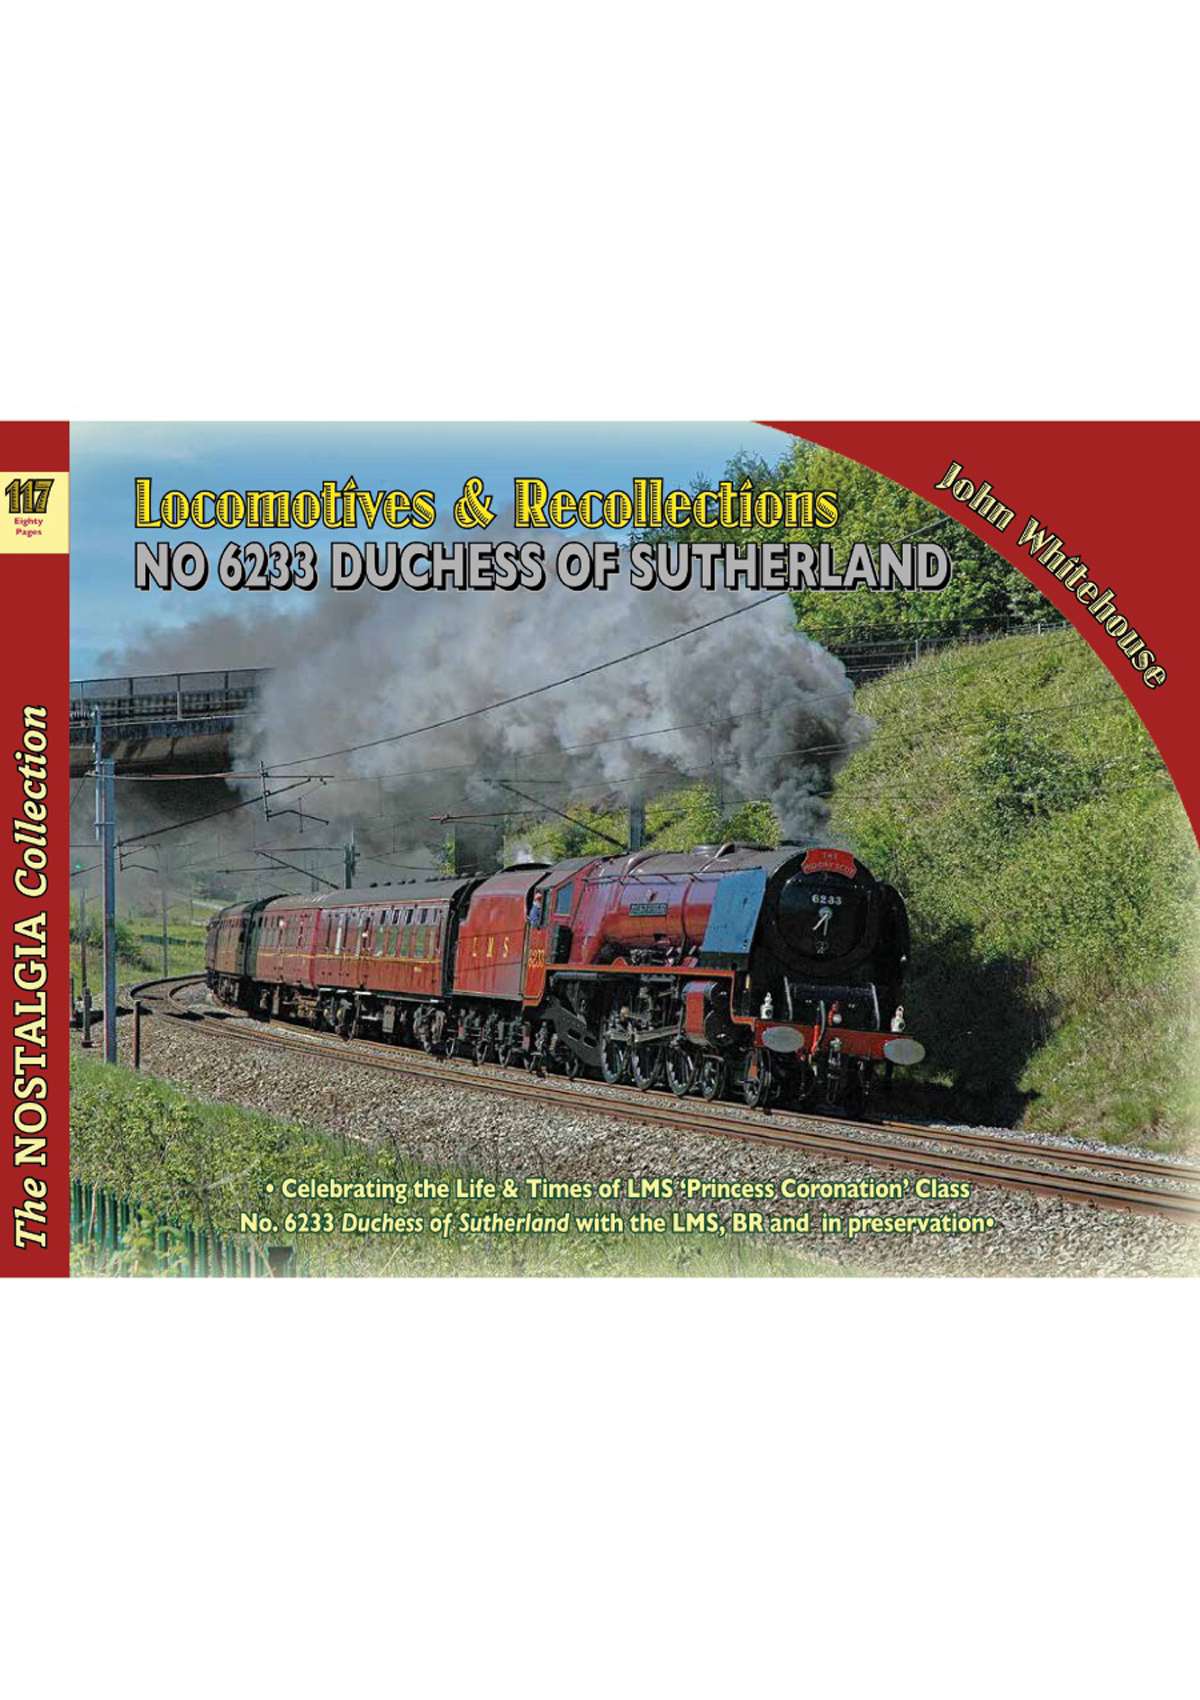 5898 - Locomotive Recollections 46233 Duchess of Sutherland